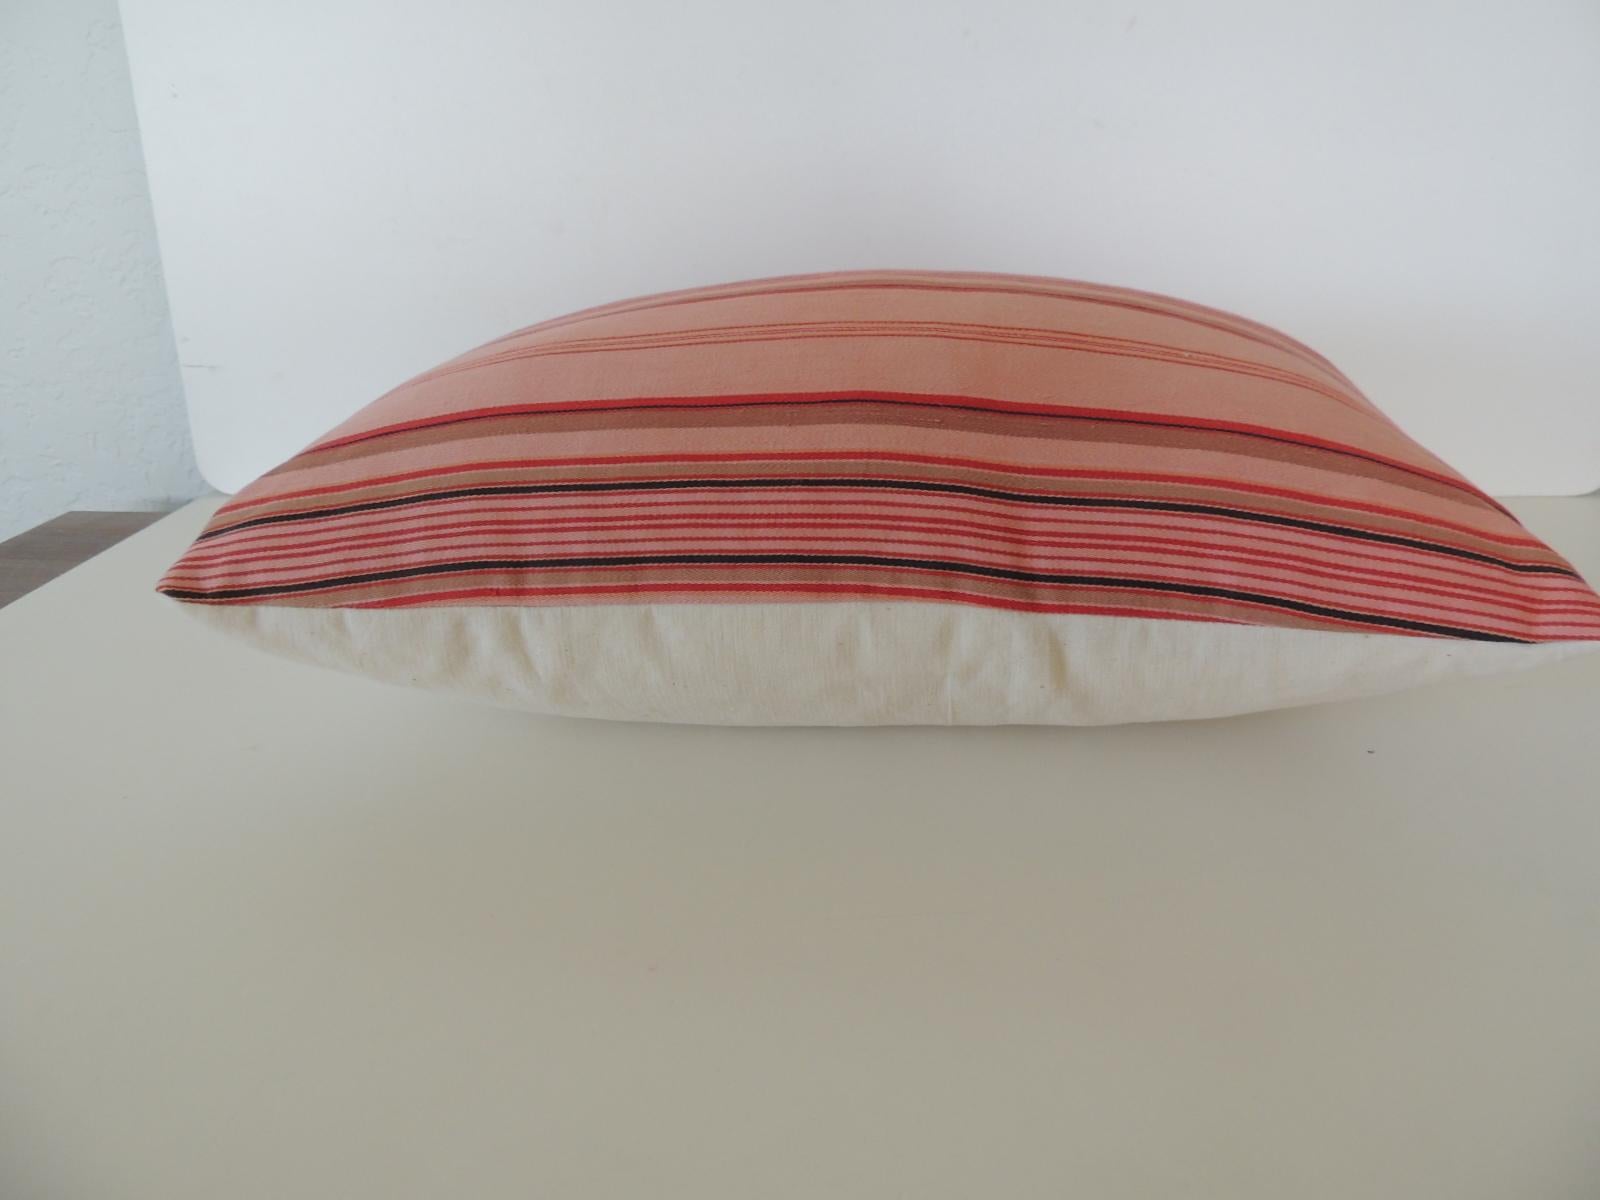 French Provincial Vintage French Pink and Red Stripes Lumbar Decorative Pillow